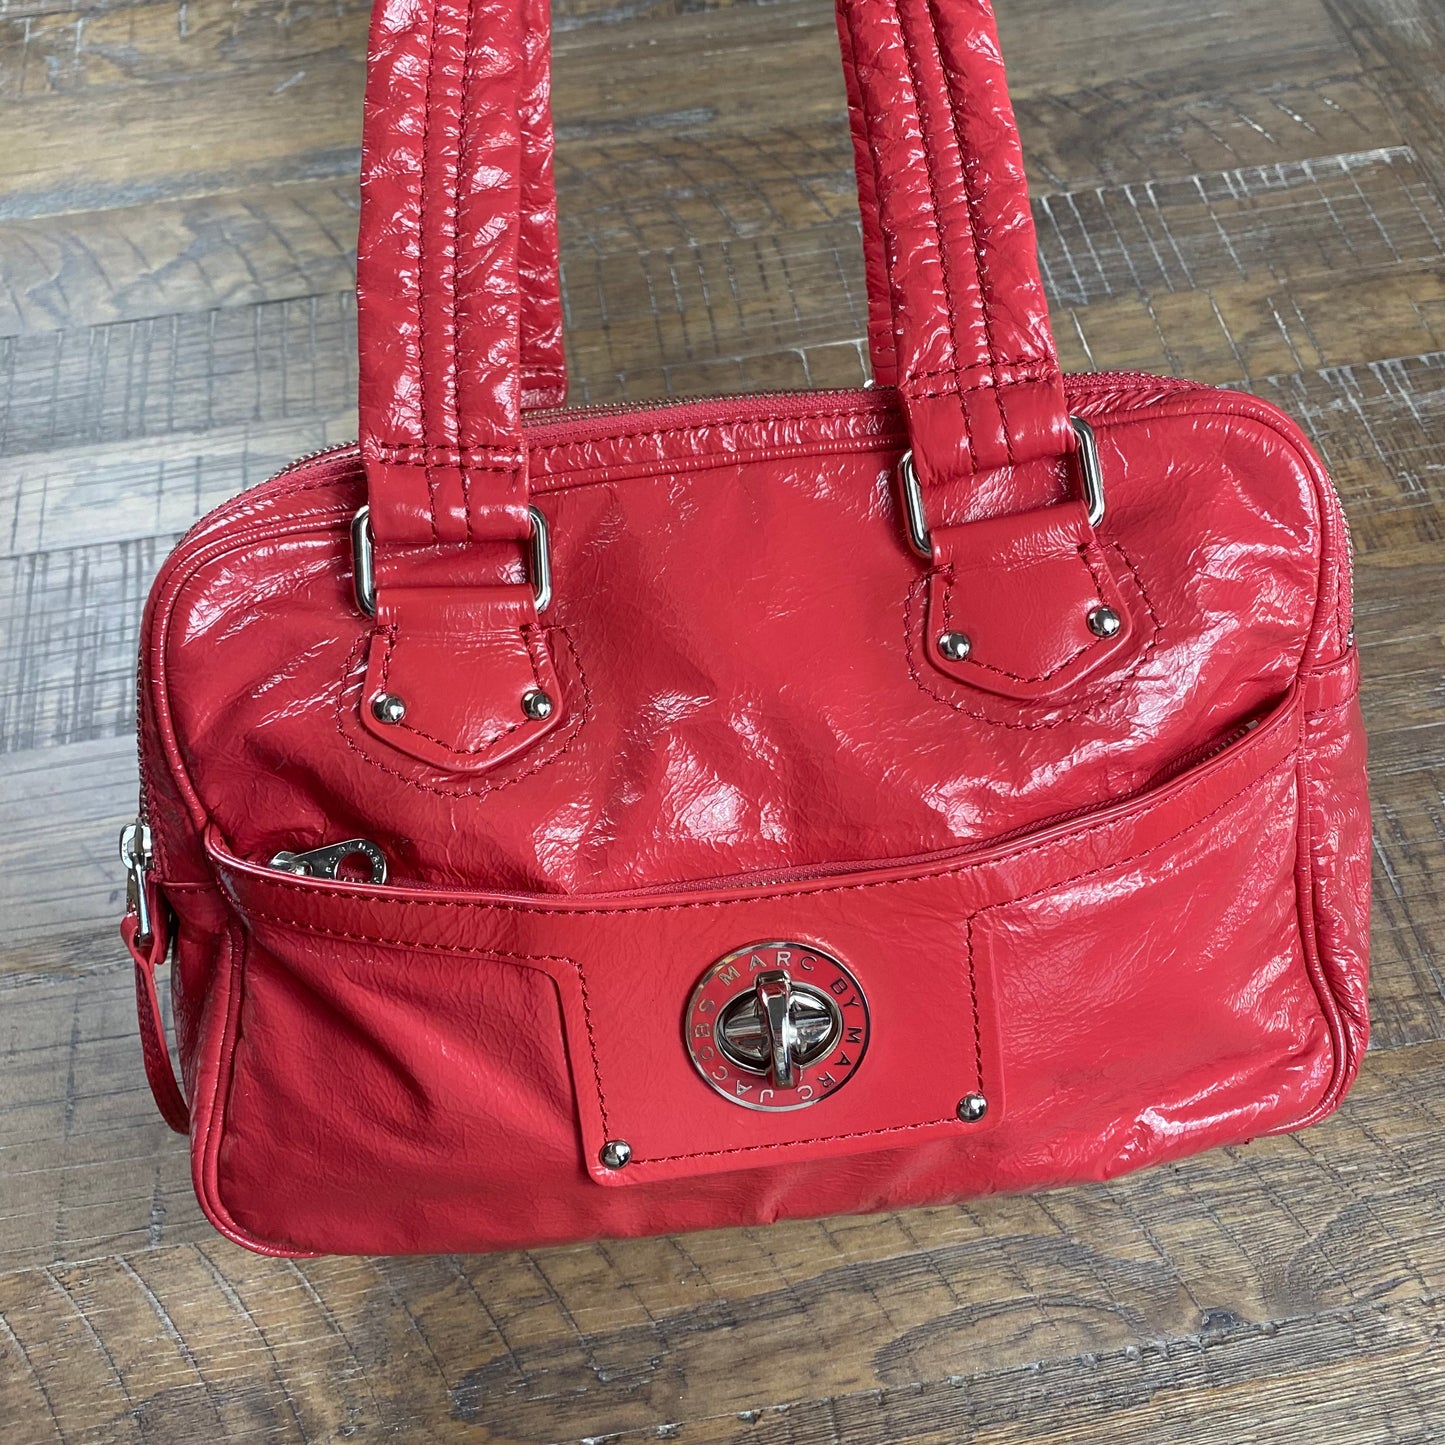 Marc Jacobs Totally Turnlock Patent Leather Satchel